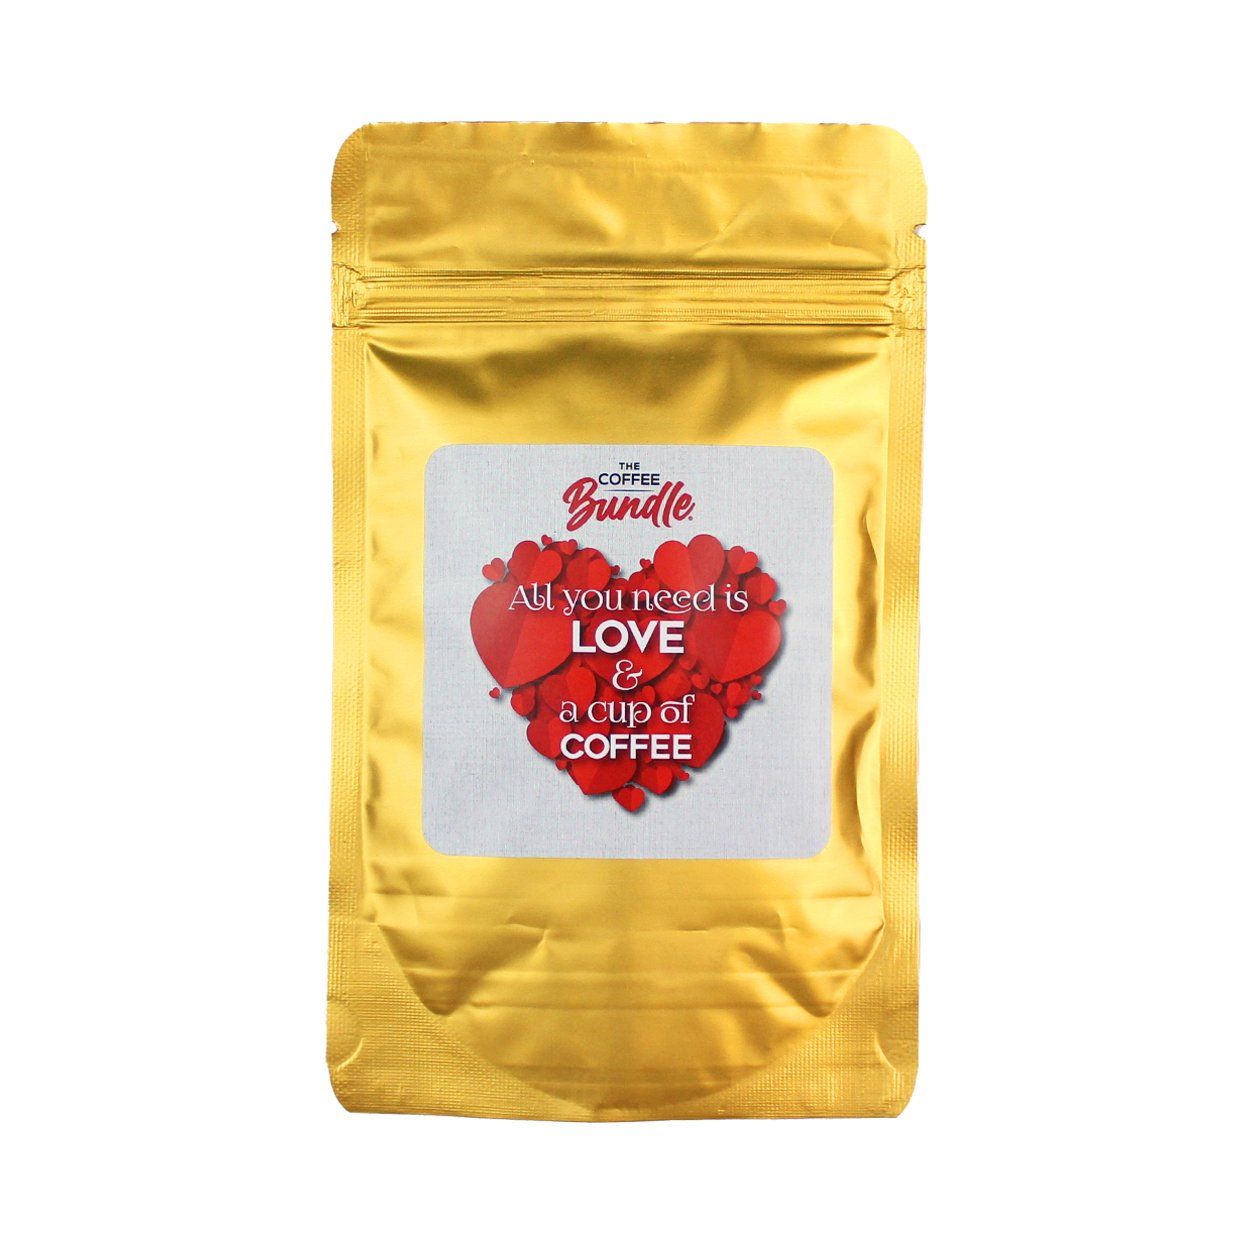 906462-bundle-all-you-need-is-love-filtre-coffee